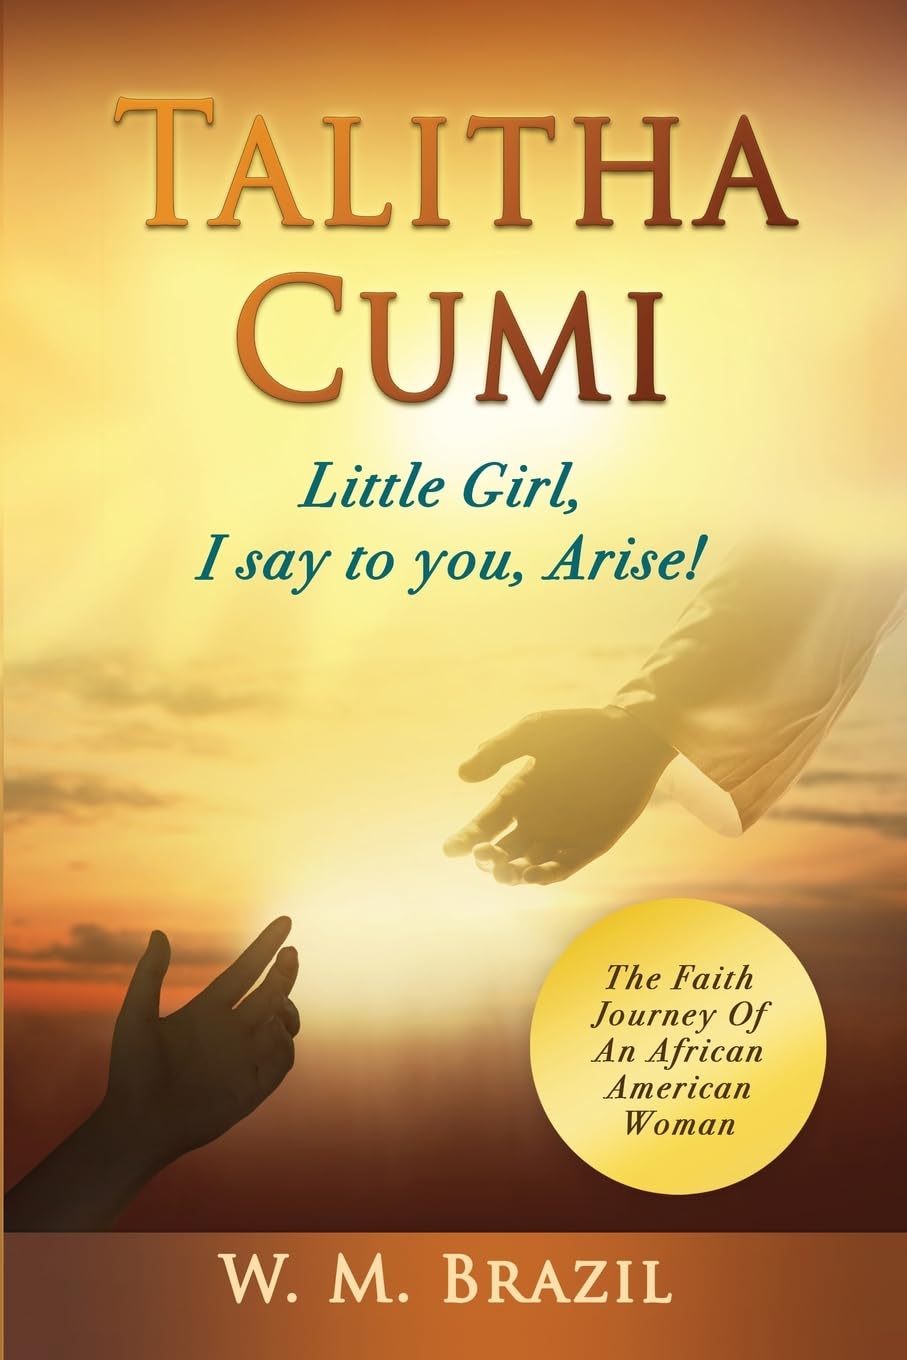 New book "Talitha Cumi" by W.M. Brazil is released, an inspirational true story of the journey to God and the transformative power of faith